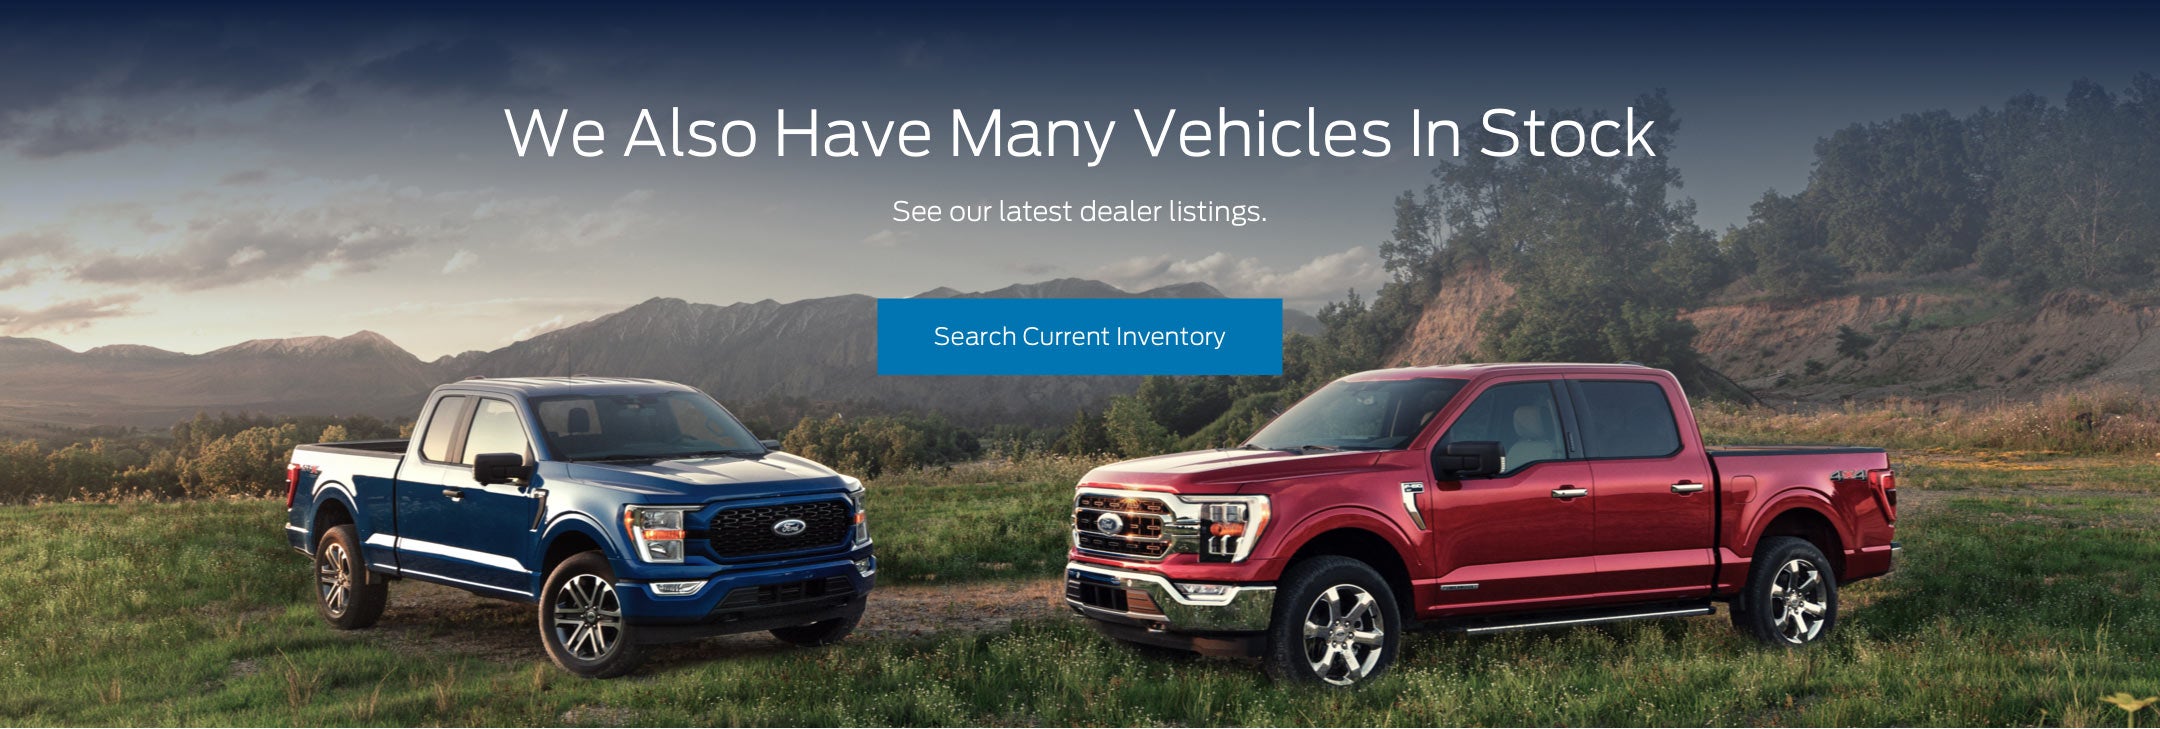 Ford vehicles in stock | Beechmont Ford Inc in Cincinnati OH